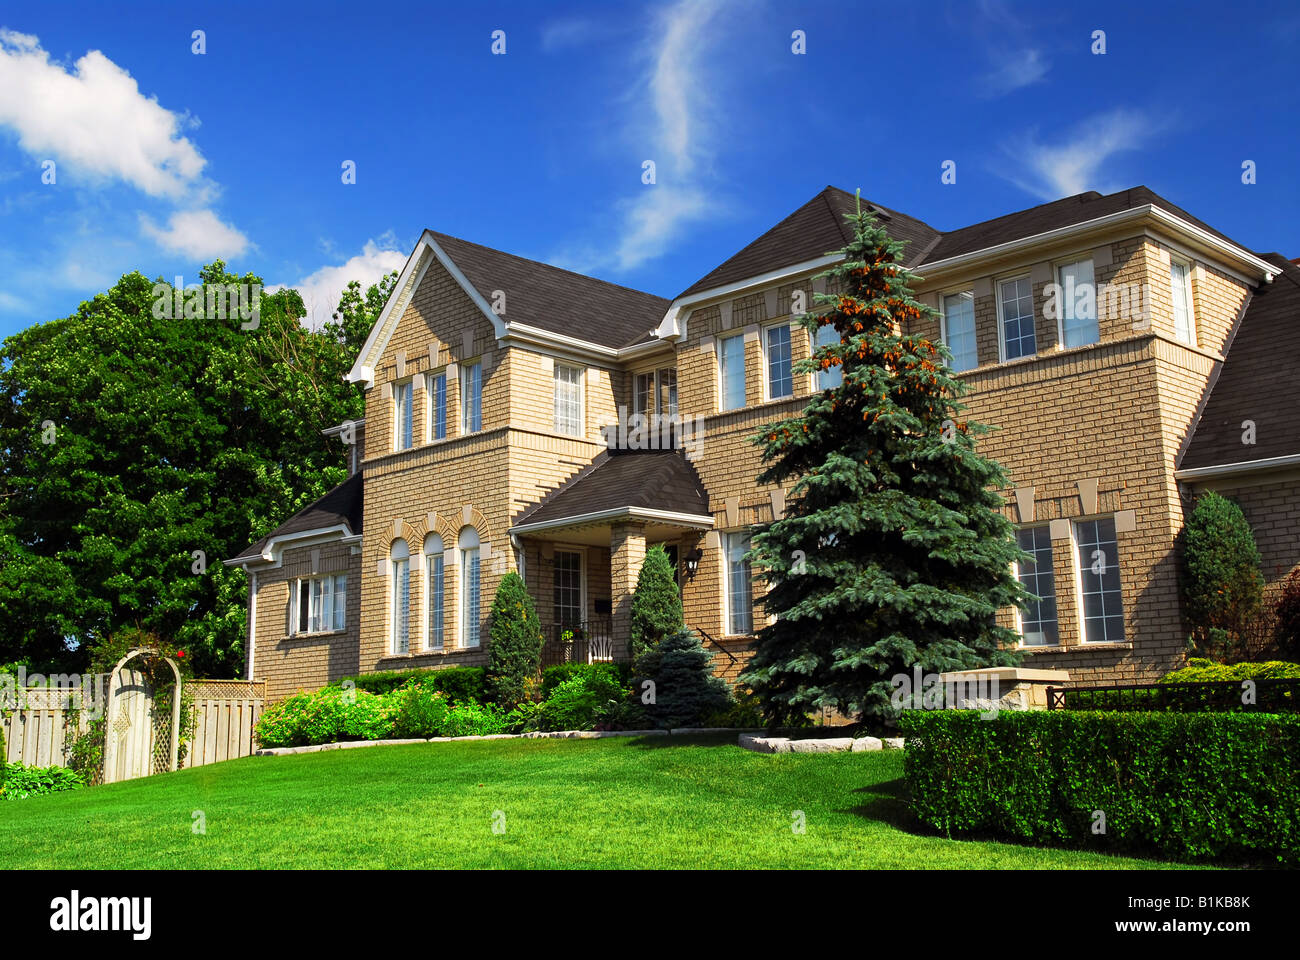 Large upscale residential home with bright green lawn and blue sky Stock Photo